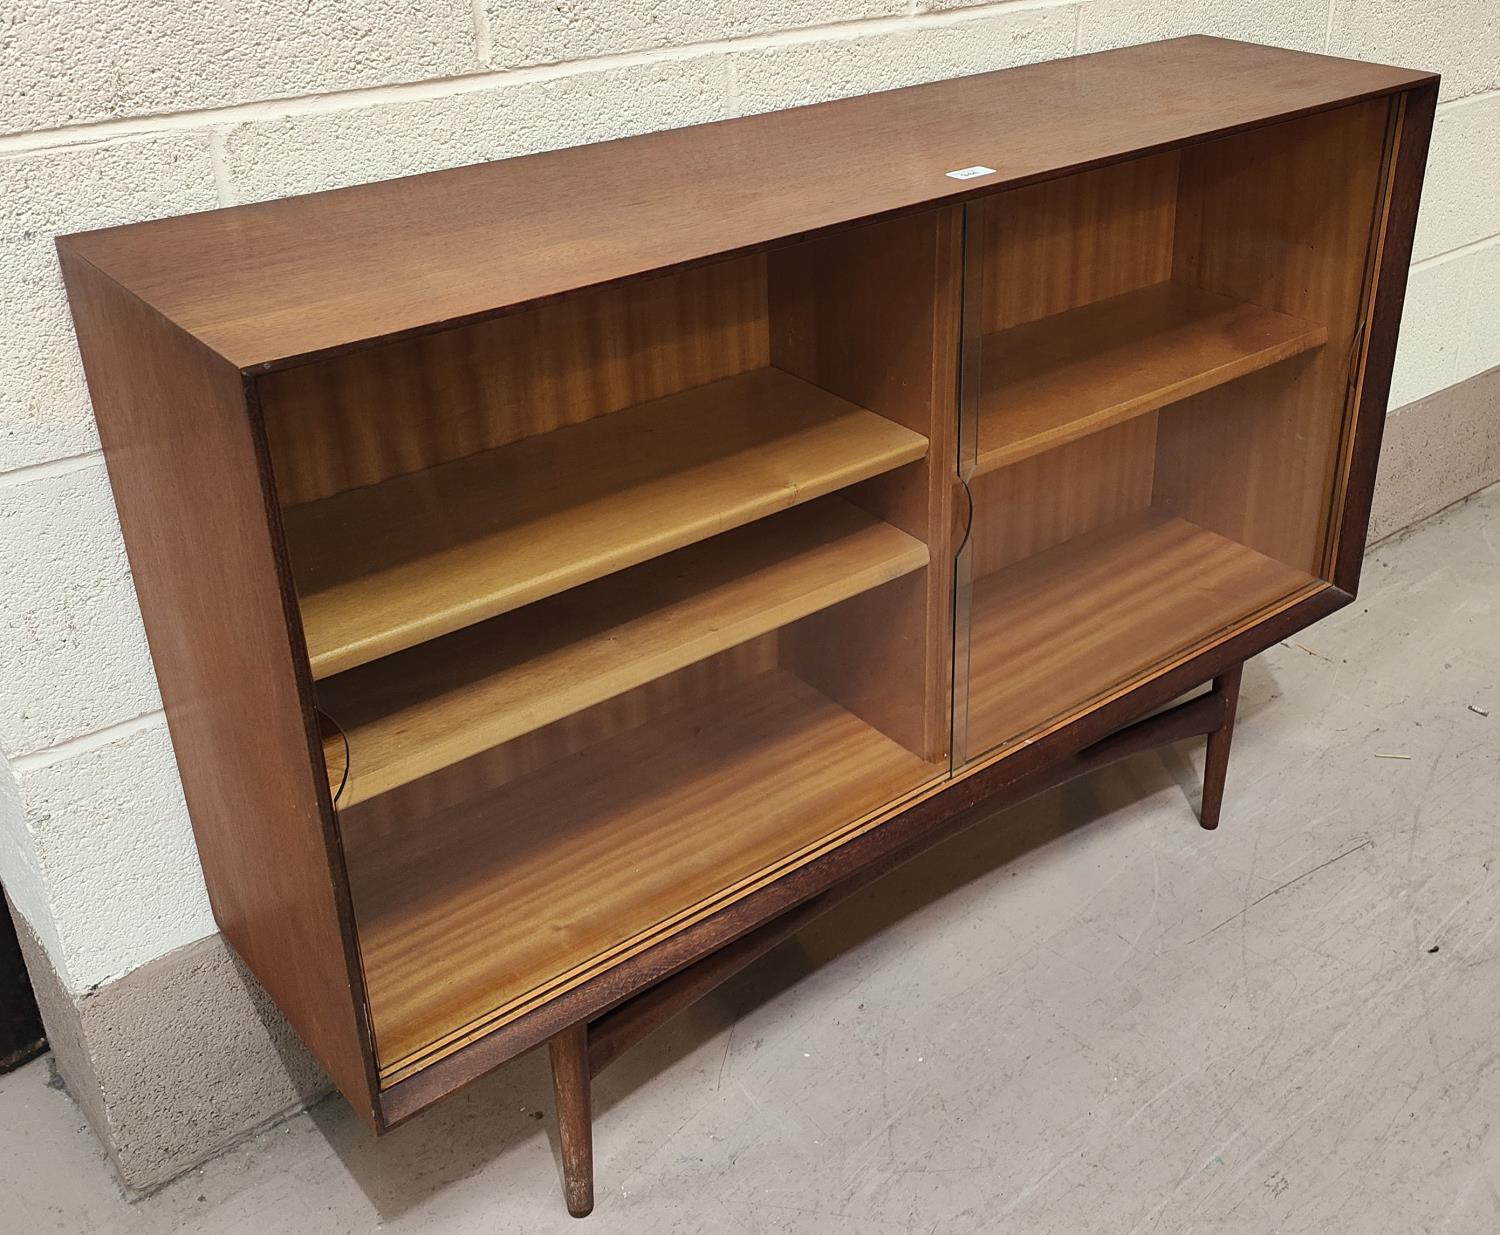 A 1960's G-Plan style teak side cabinet by Dalescraft enclosed by 2 sliding doors - Image 2 of 2